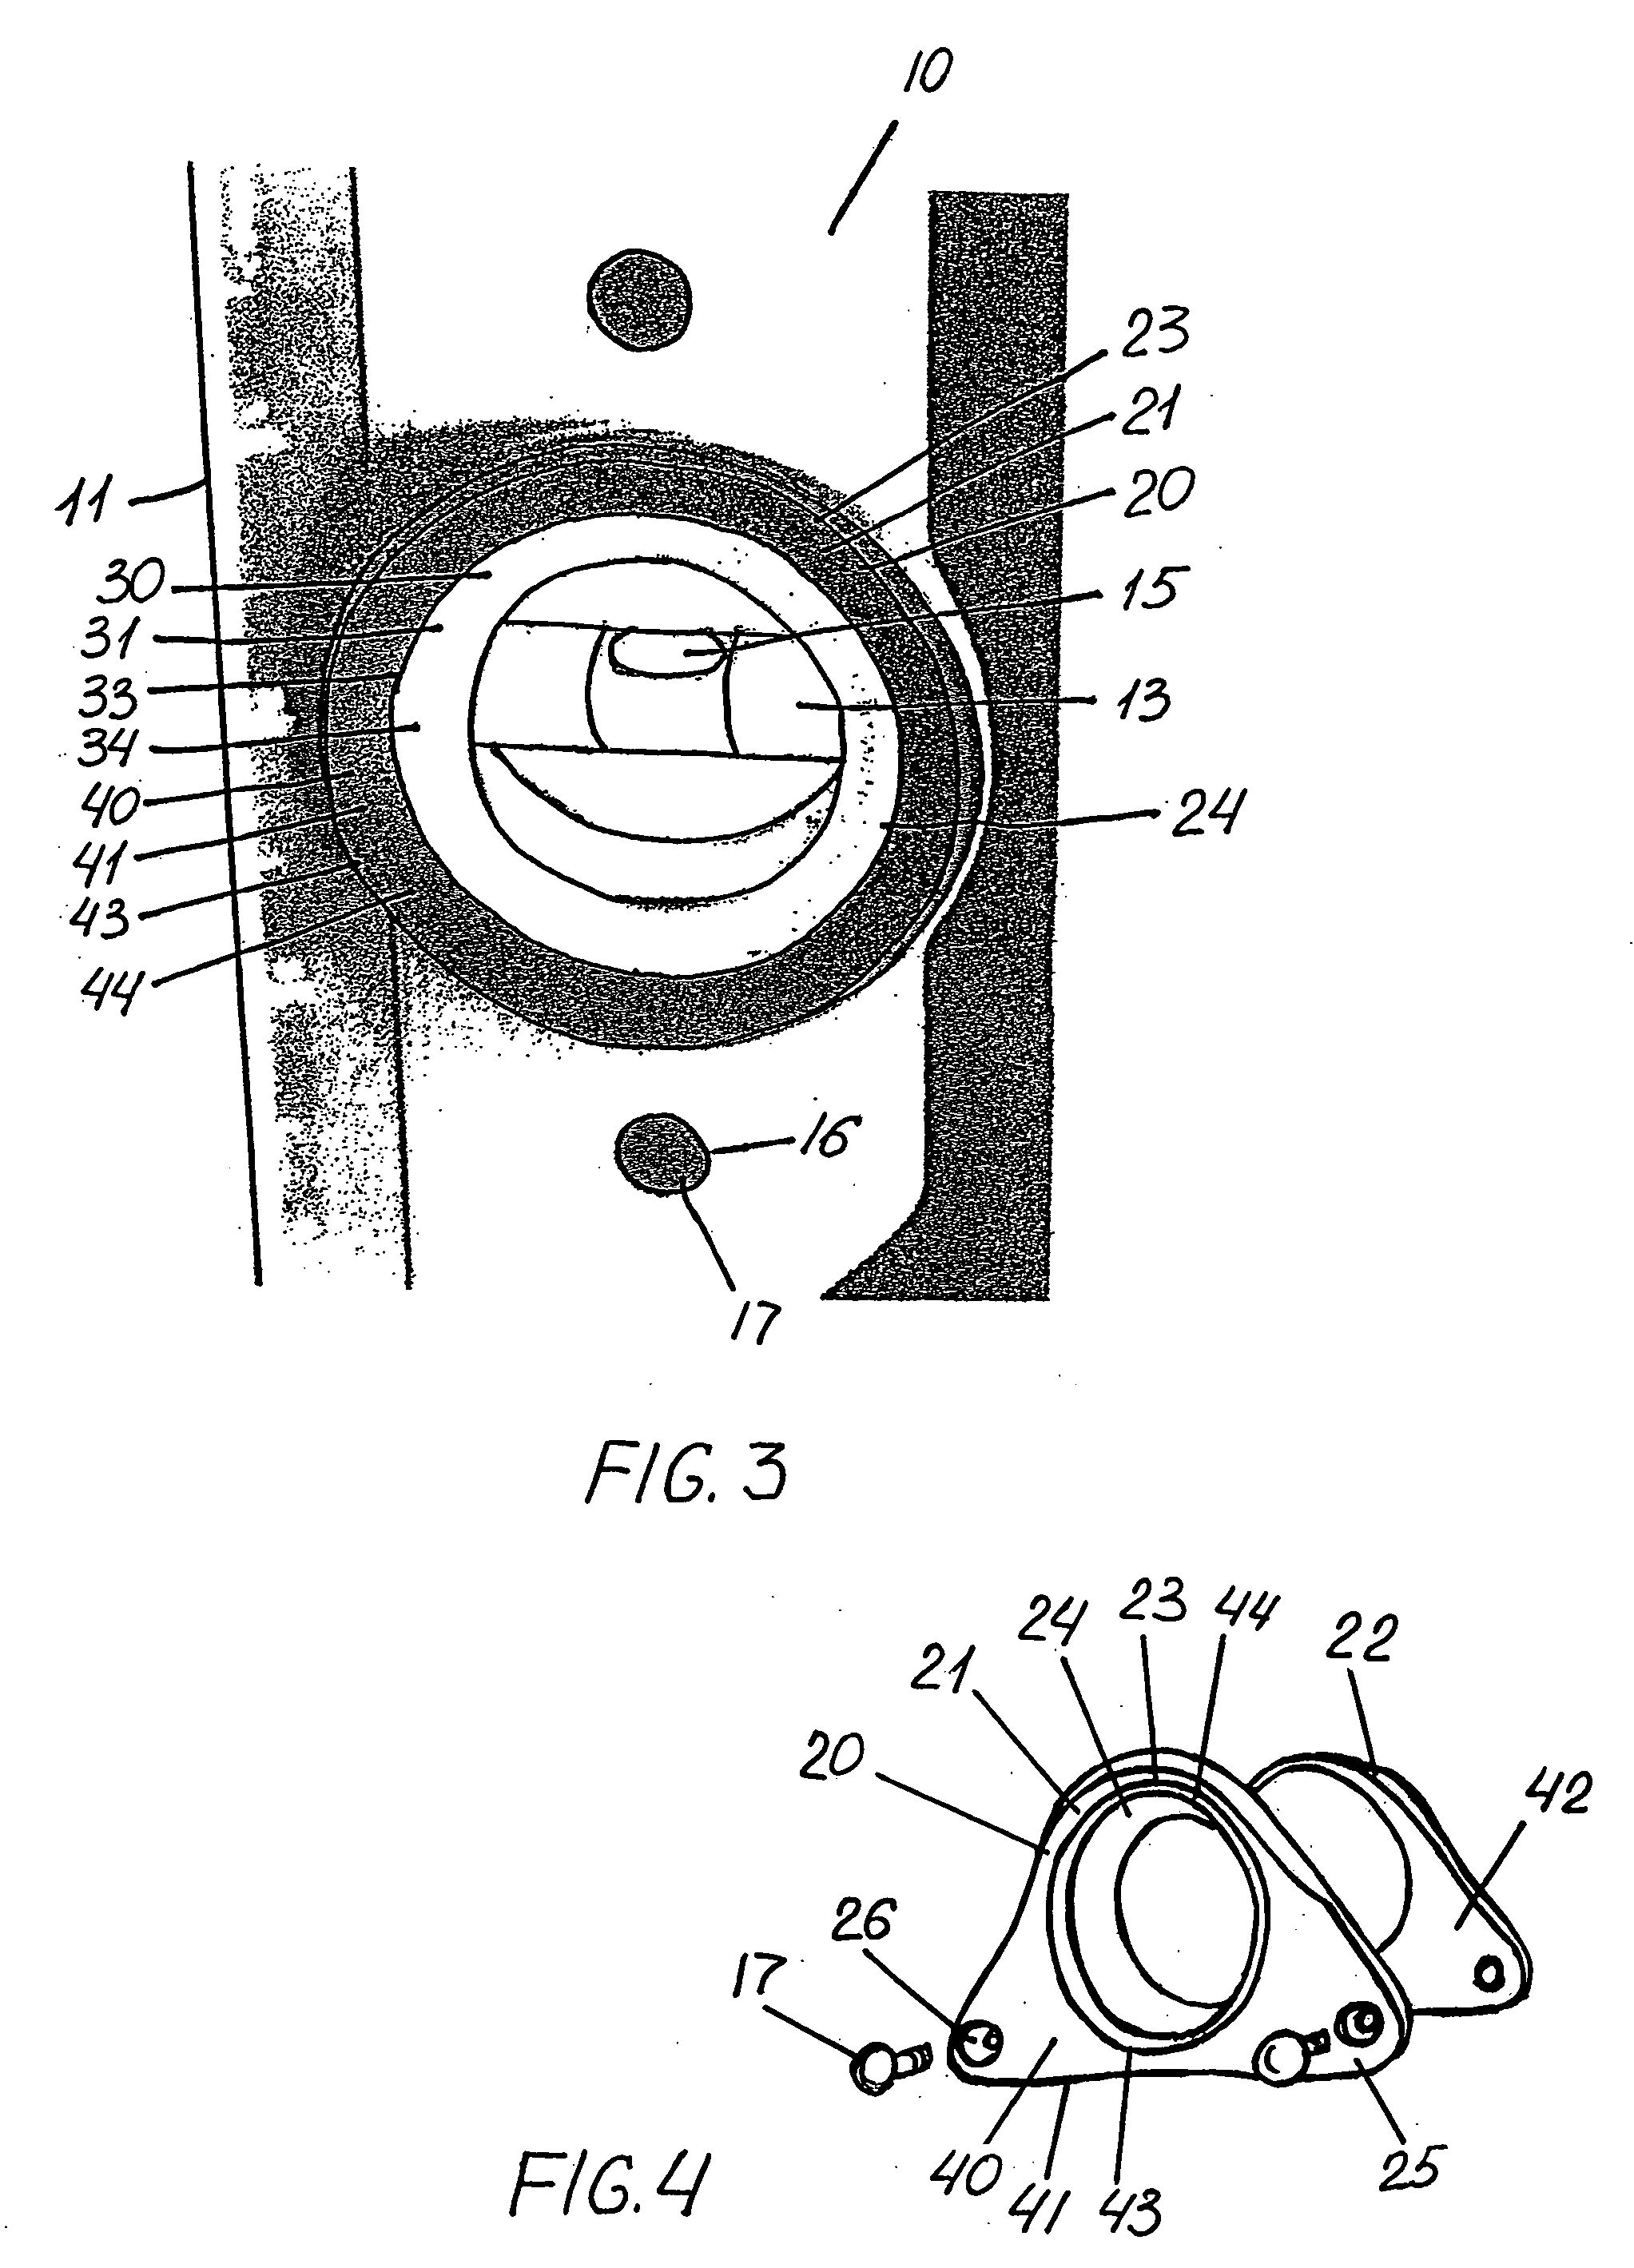 Structure and method for holding and protecting vials in levels